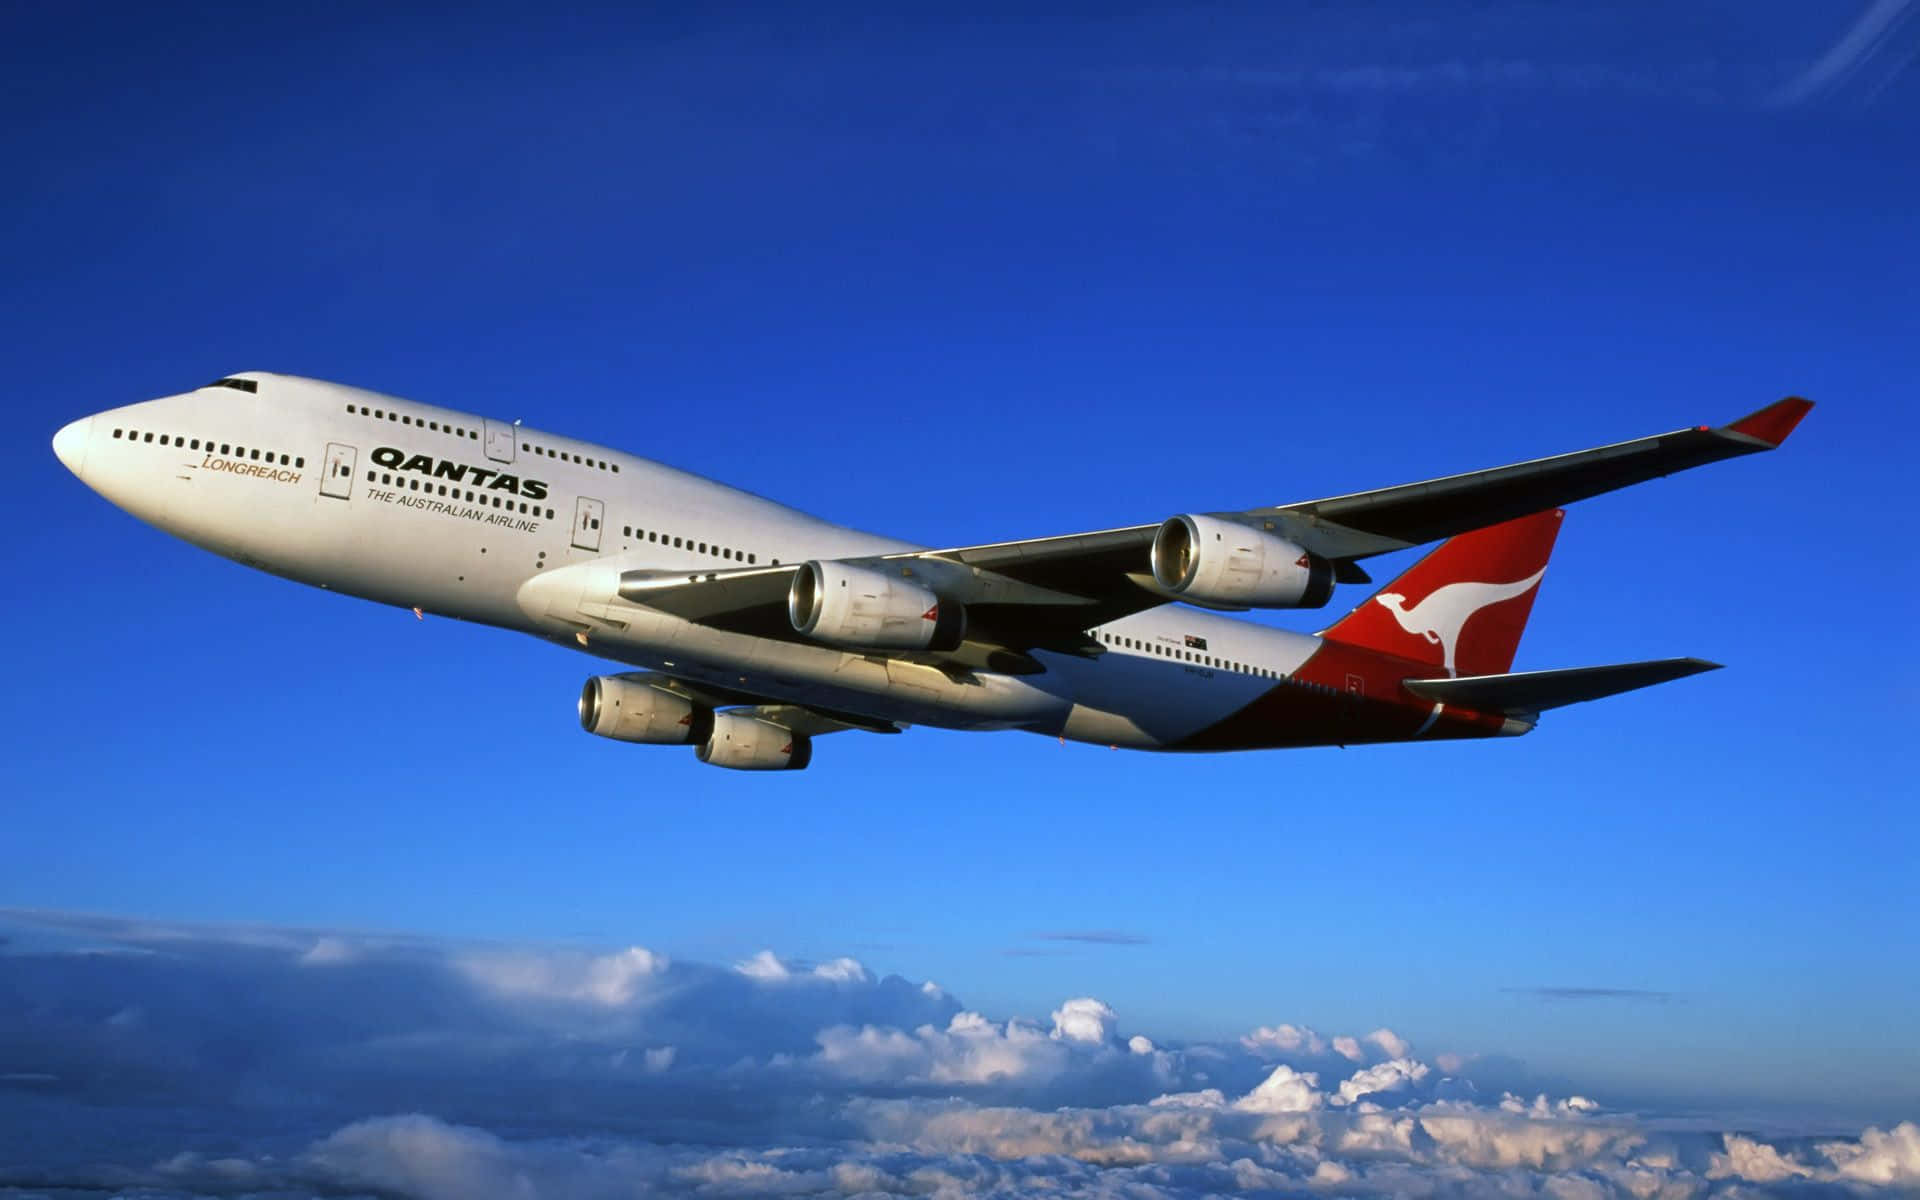 A 747 Commercial Airplane Taking Off